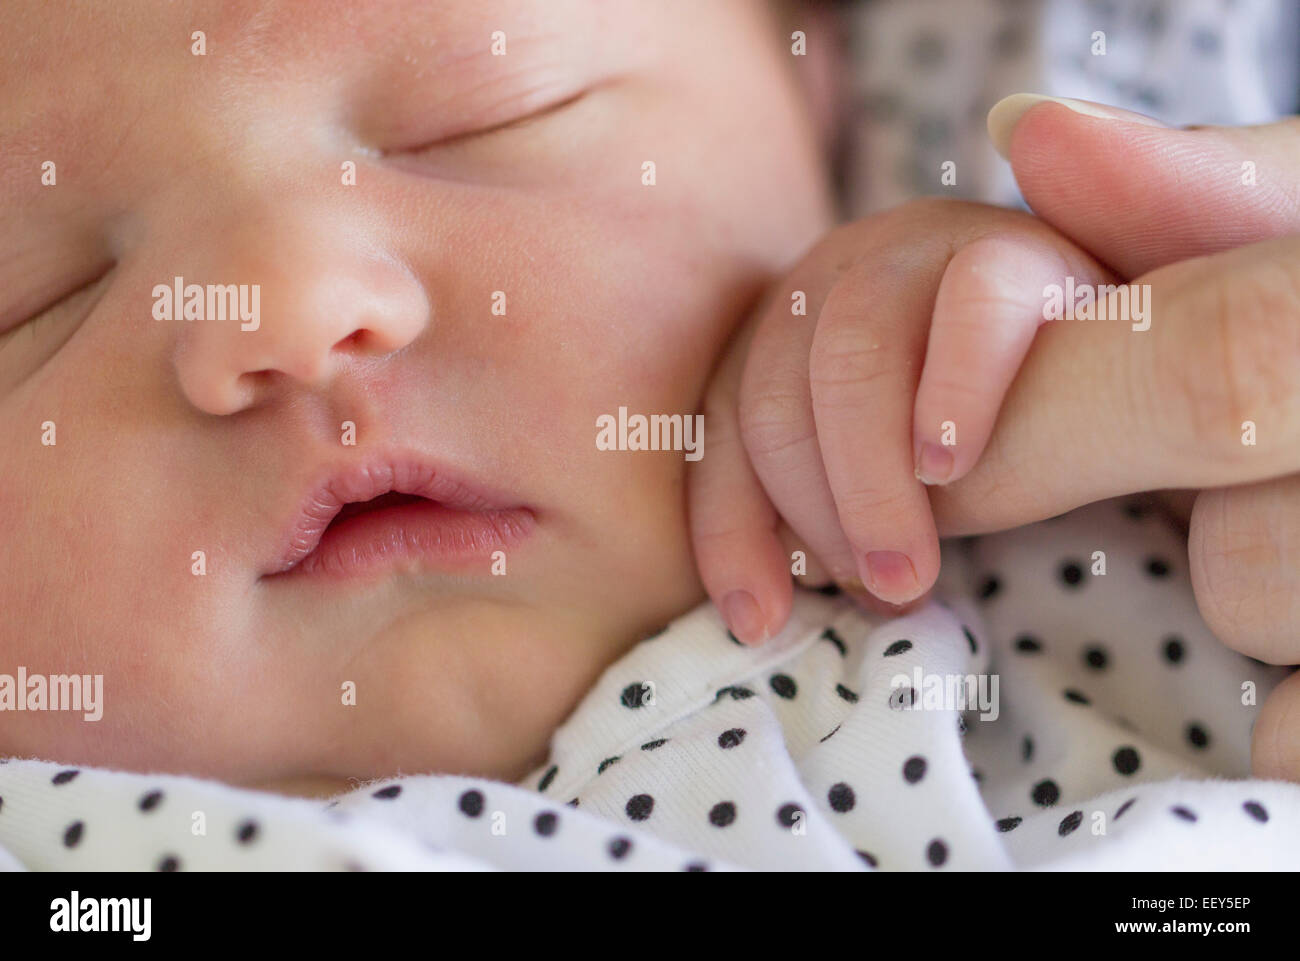 Newborn baby girl asleep and gripping the finger of her mother close to her face Stock Photo